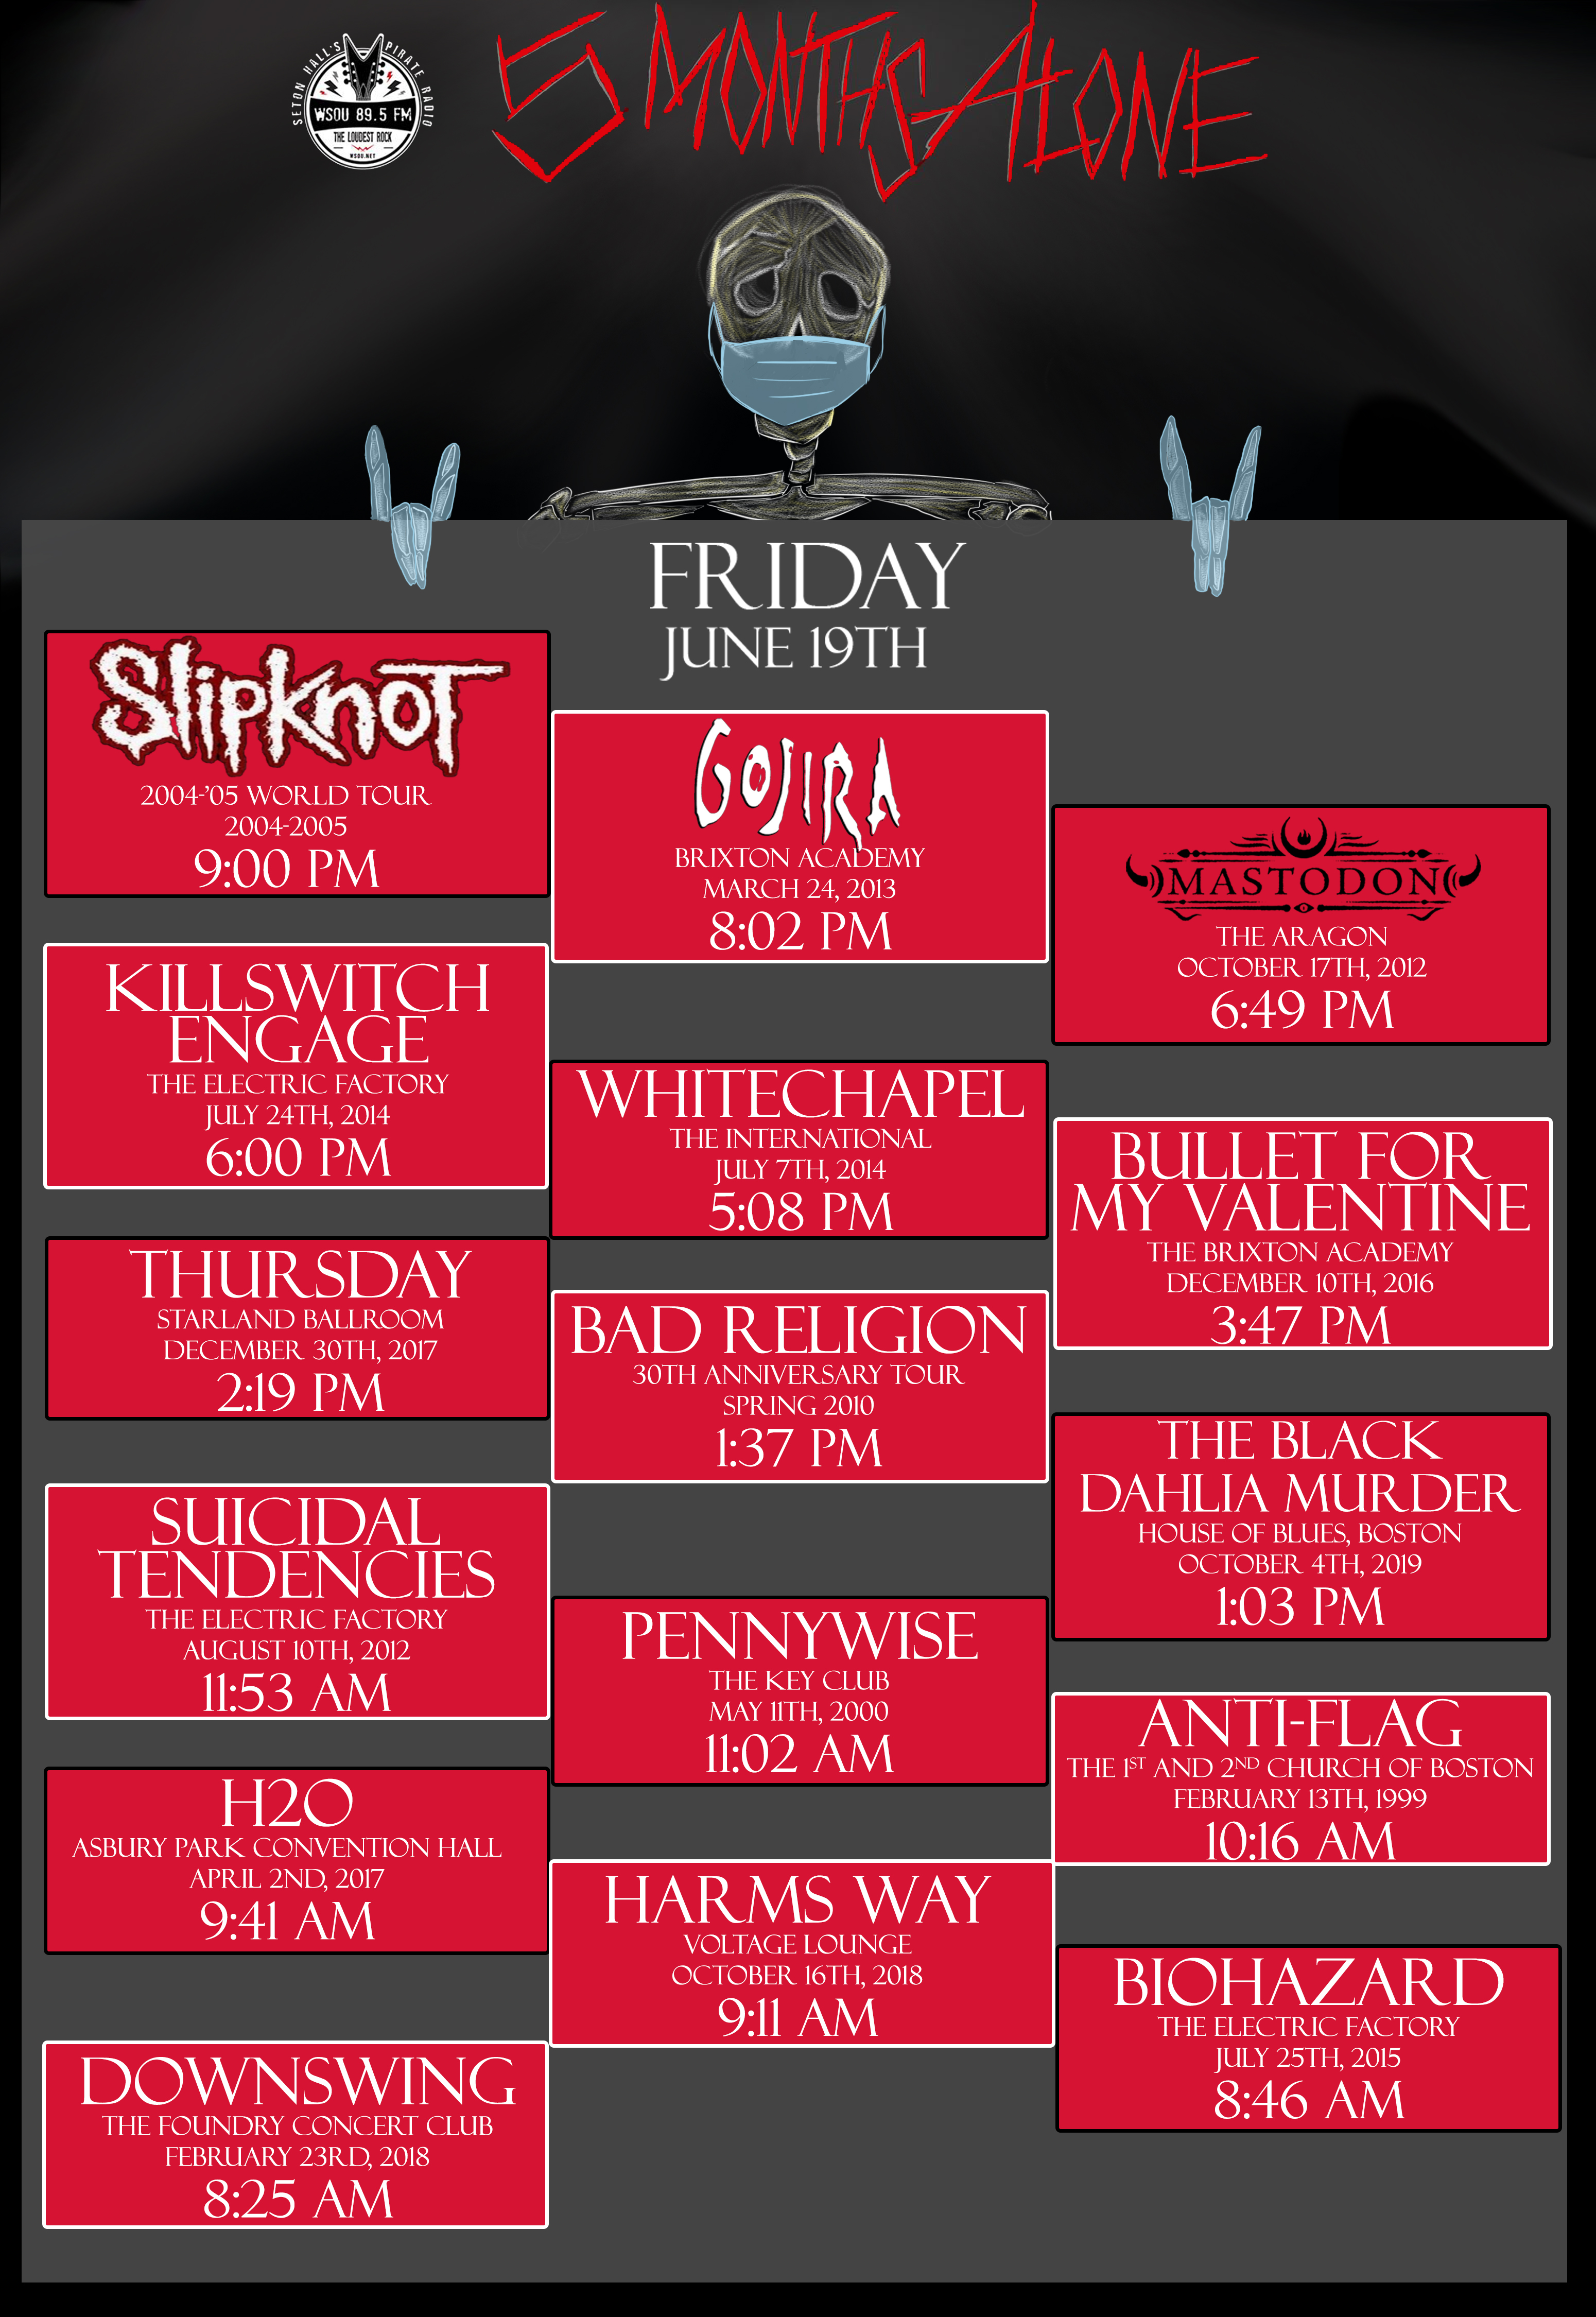 SLIPKNOT 9:00 PM GOJIRA 8:02 PM MASTODON 6:49 PM KILLSWITCH ENGAGE 6:00 PM WHITECHAPEL 5:08 PM BULLET FOR MY VALENTINE 3:37 PM THURSDAY 2:19 PM BAD RELIGION 1:37 PM THE BLACK DAHLIA MURDER 1:03 PM SUICIDAL TENDENCIES 11:53 AM PENNYWISE 11:02 AM AND MORE!